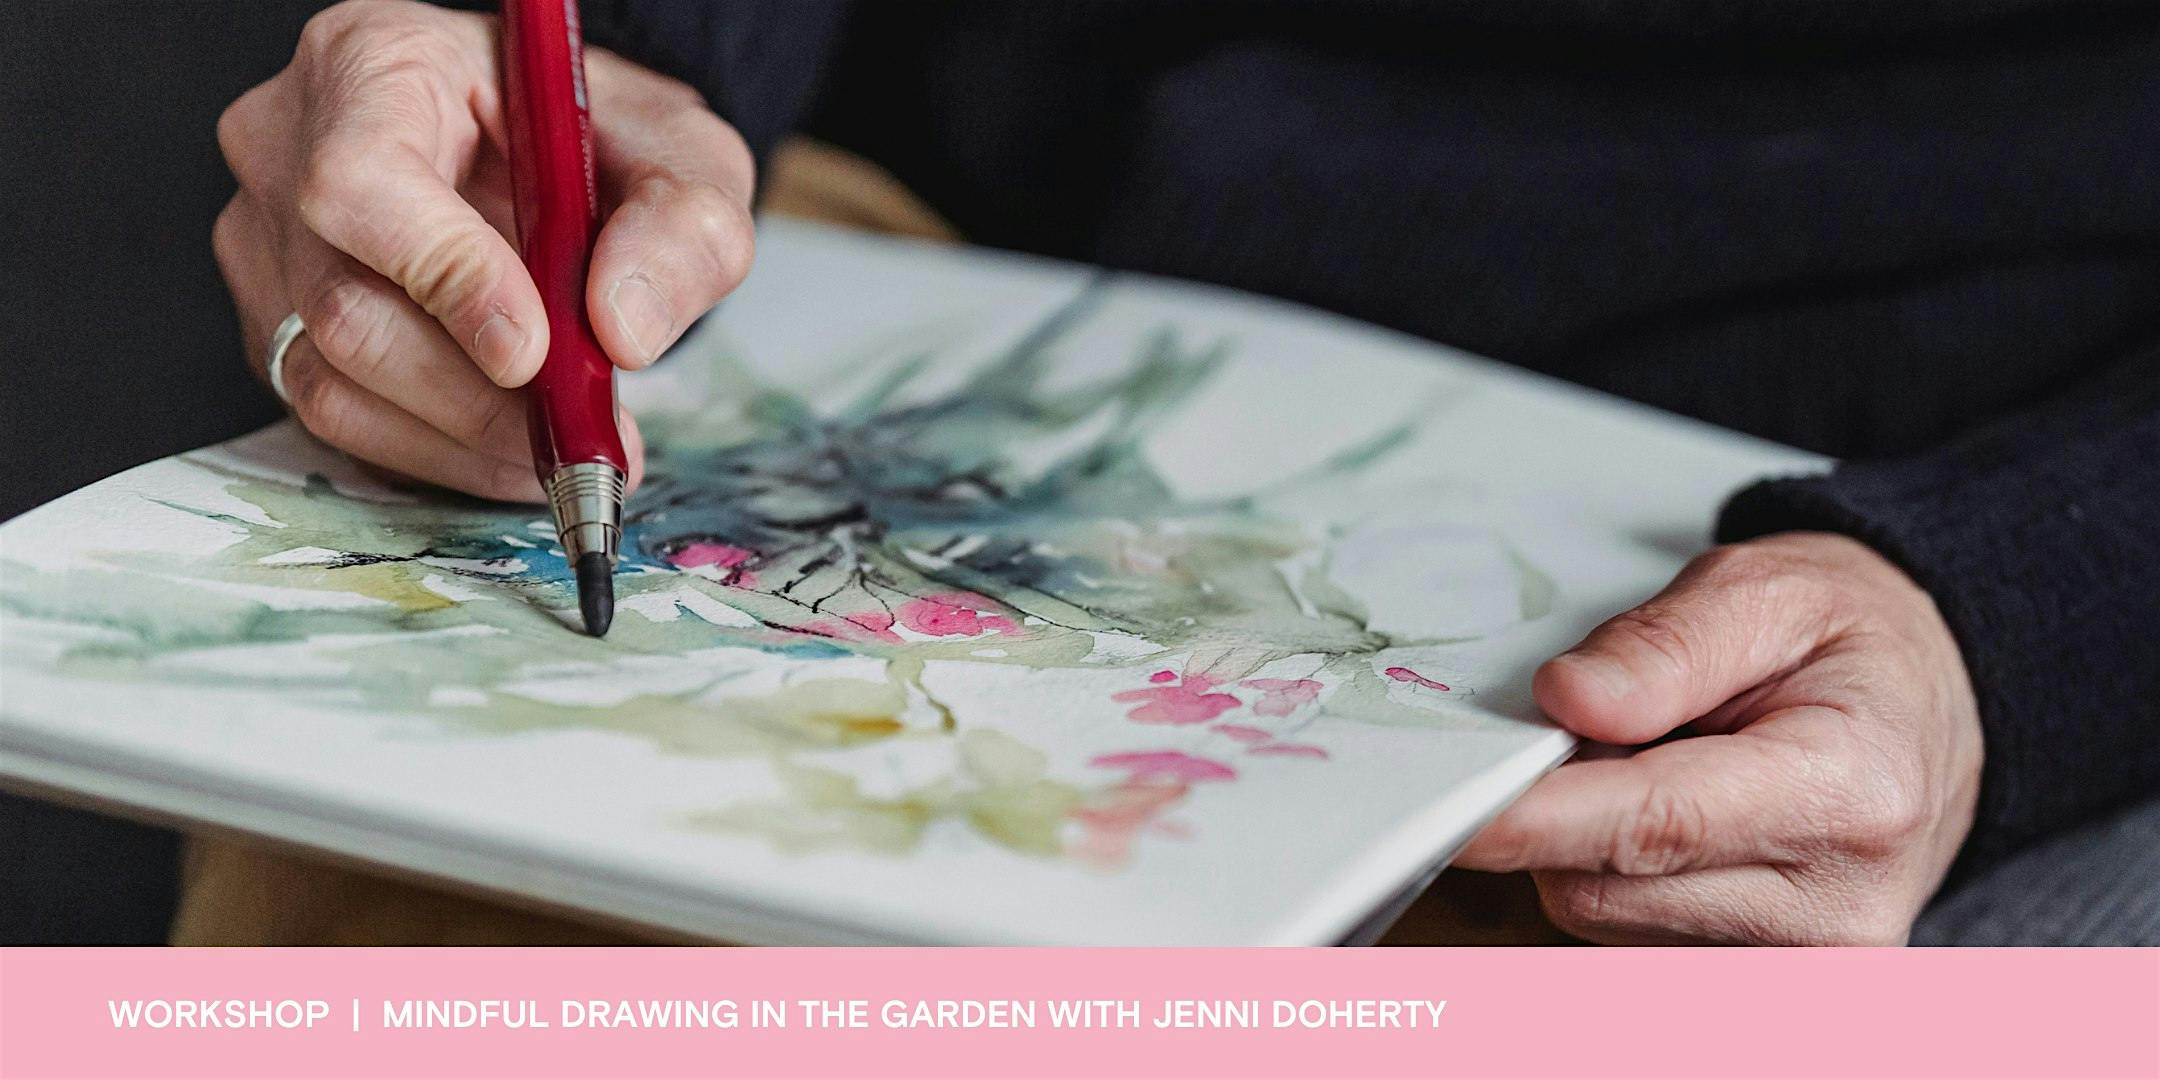 Image for Workshop | Mindful Drawing in the Garden with Jenni Doherty